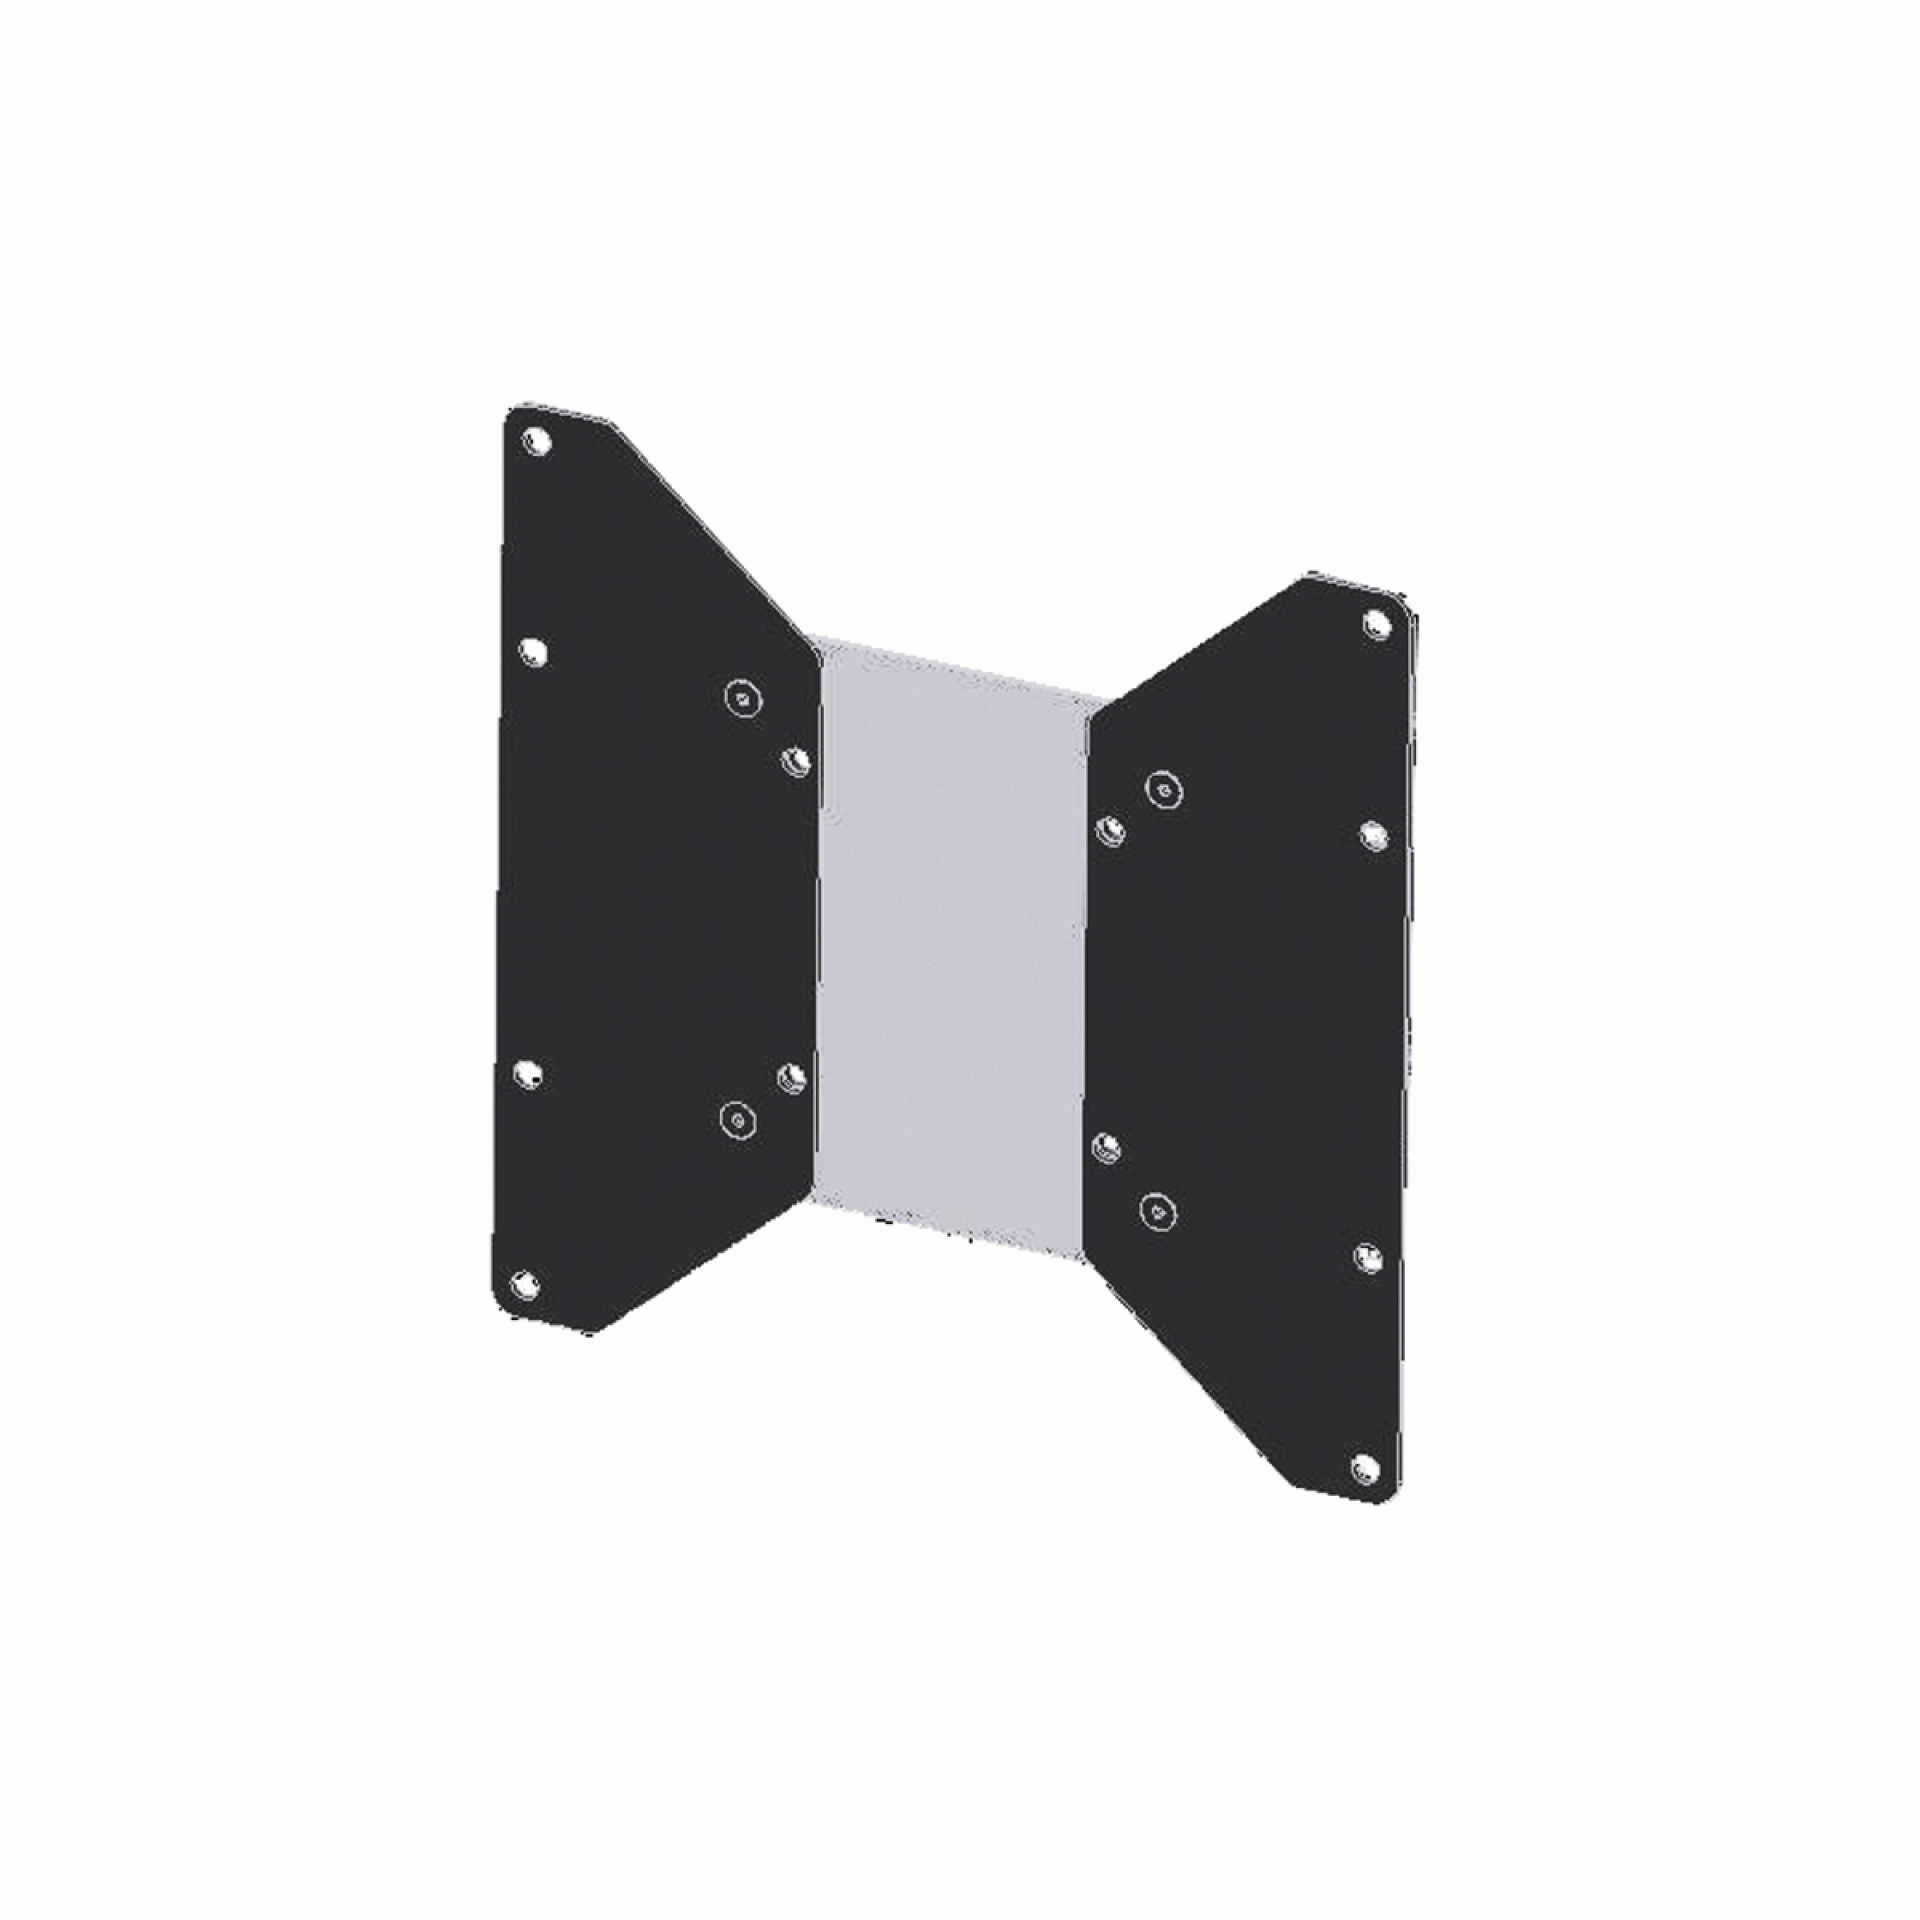 MOR/ryde | TV54-009H | Small Adapter Plate TV Mount